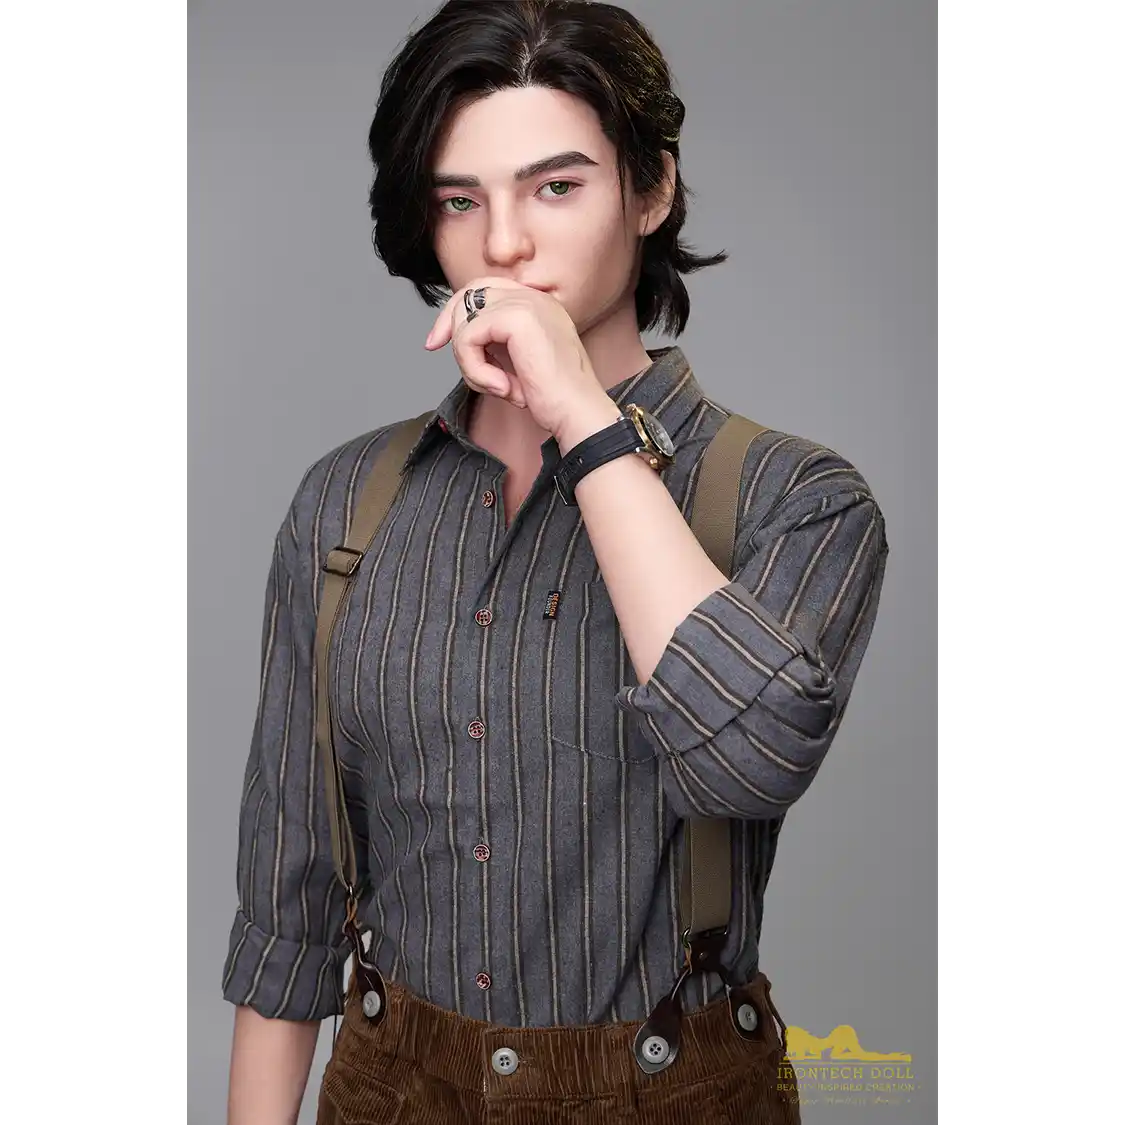 5ft 6in or 170cm silicone male sex doll with muscular arms, chest and abs with long hair and blue eyes in an old fashioned outfit.